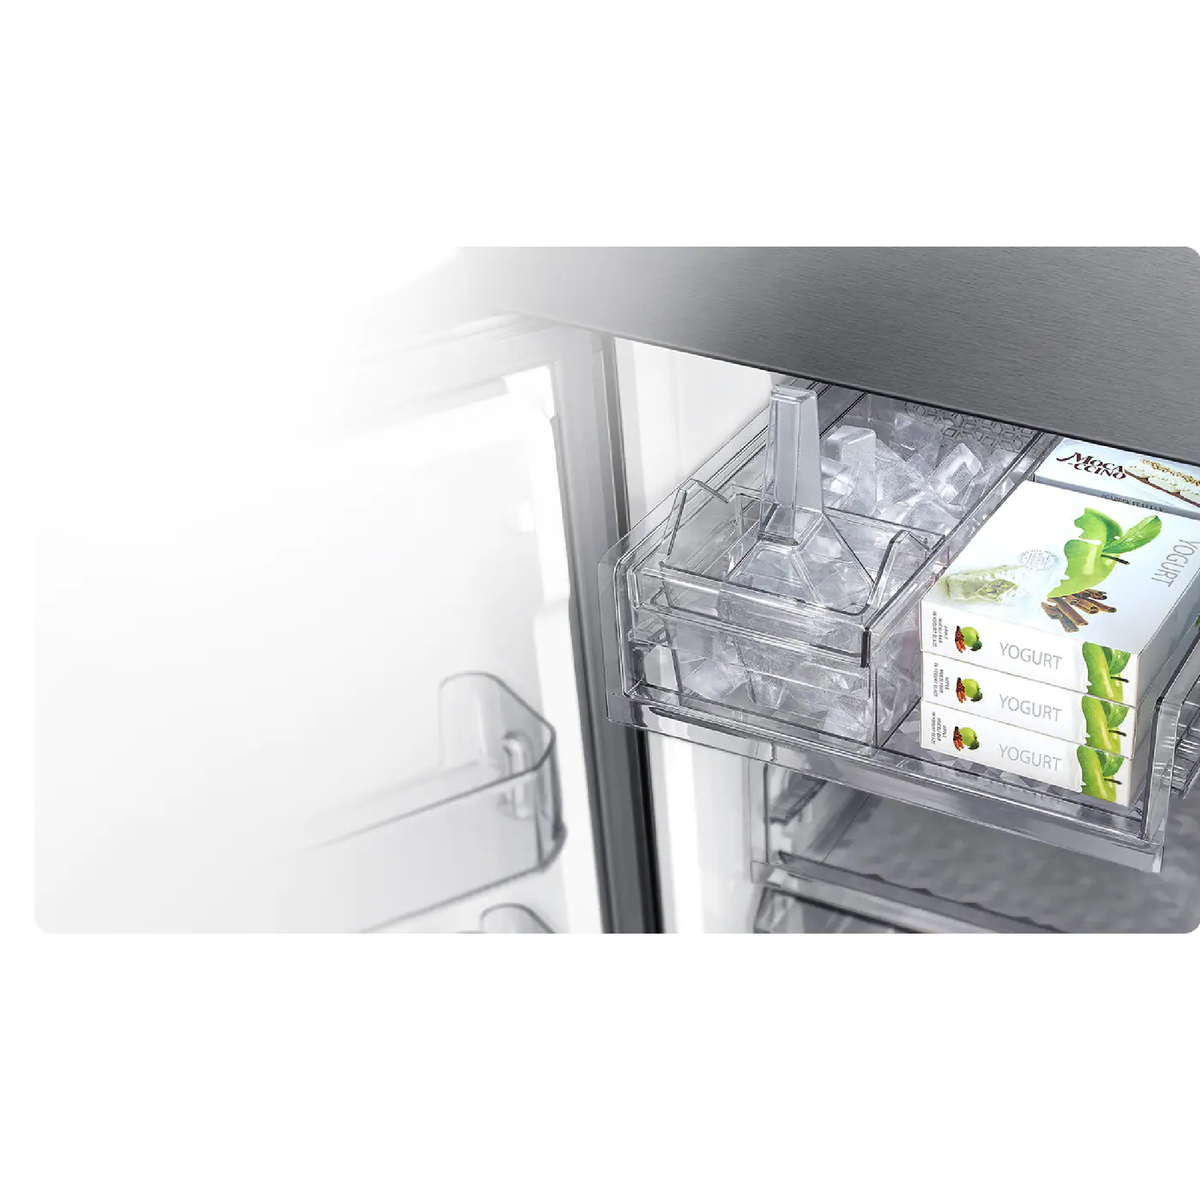 Samsung Bespoke French Door Refrigerator with Customizable Design, 772 L Capacity, RF85A92W1AP